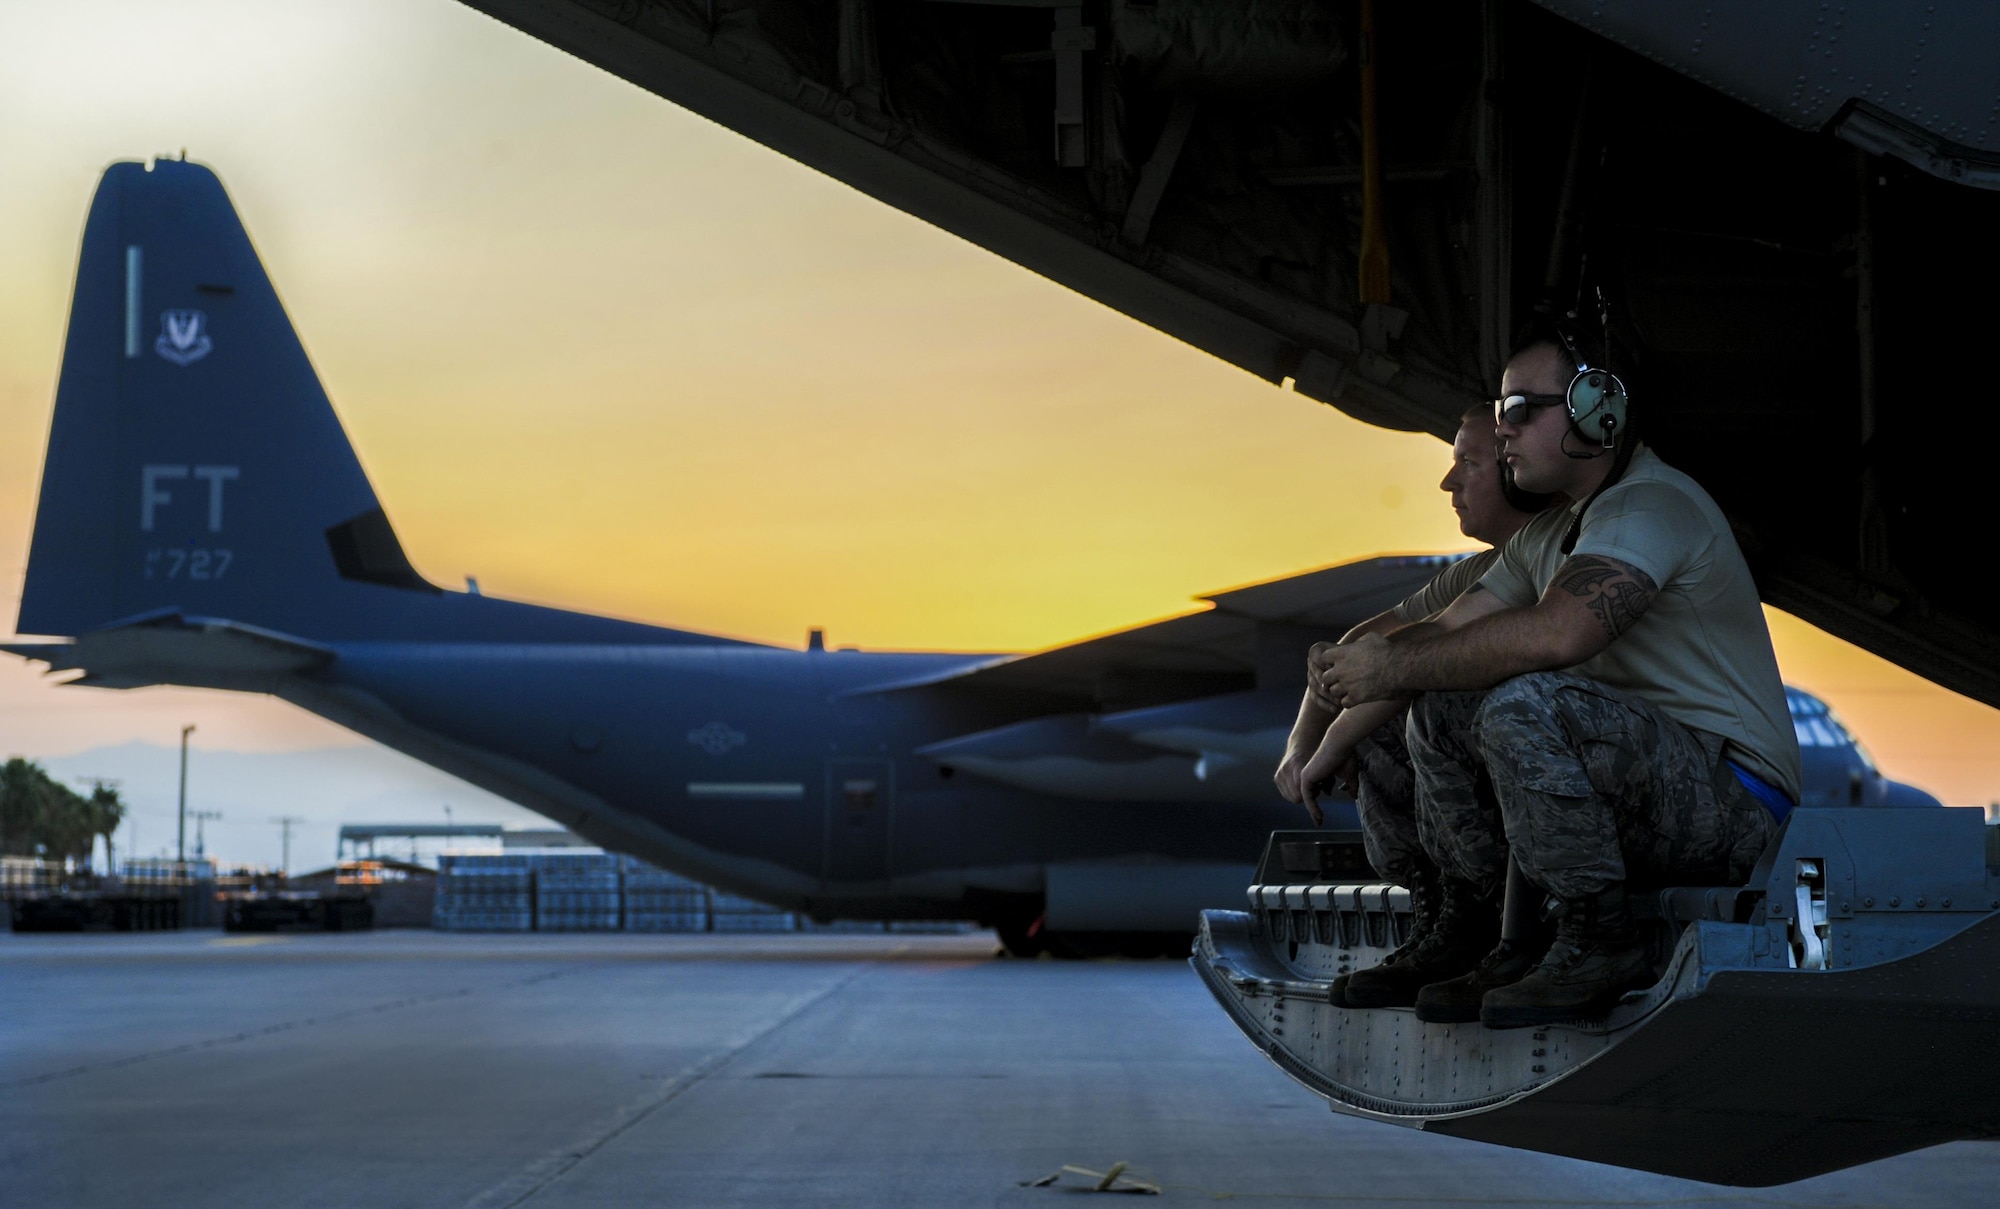 Crew Chiefs assigned to the 71st Rescue Squadron, Moody Air Force Base, Georgia, sit on the back of a HC-130J Combat King II and await aircrew’s arrival during Red Flag 16-4 at Nellis Air Force Base, Nev., Aug. 25, 2016. Aircraft and personnel deploy to Nellis AFB for Red Flag under the Air Expeditionary Force concept and make up the exercise’s “blue” forces. (U.S. Air Force photo by Airman 1st Class Kevin Tanenbaum/Released)